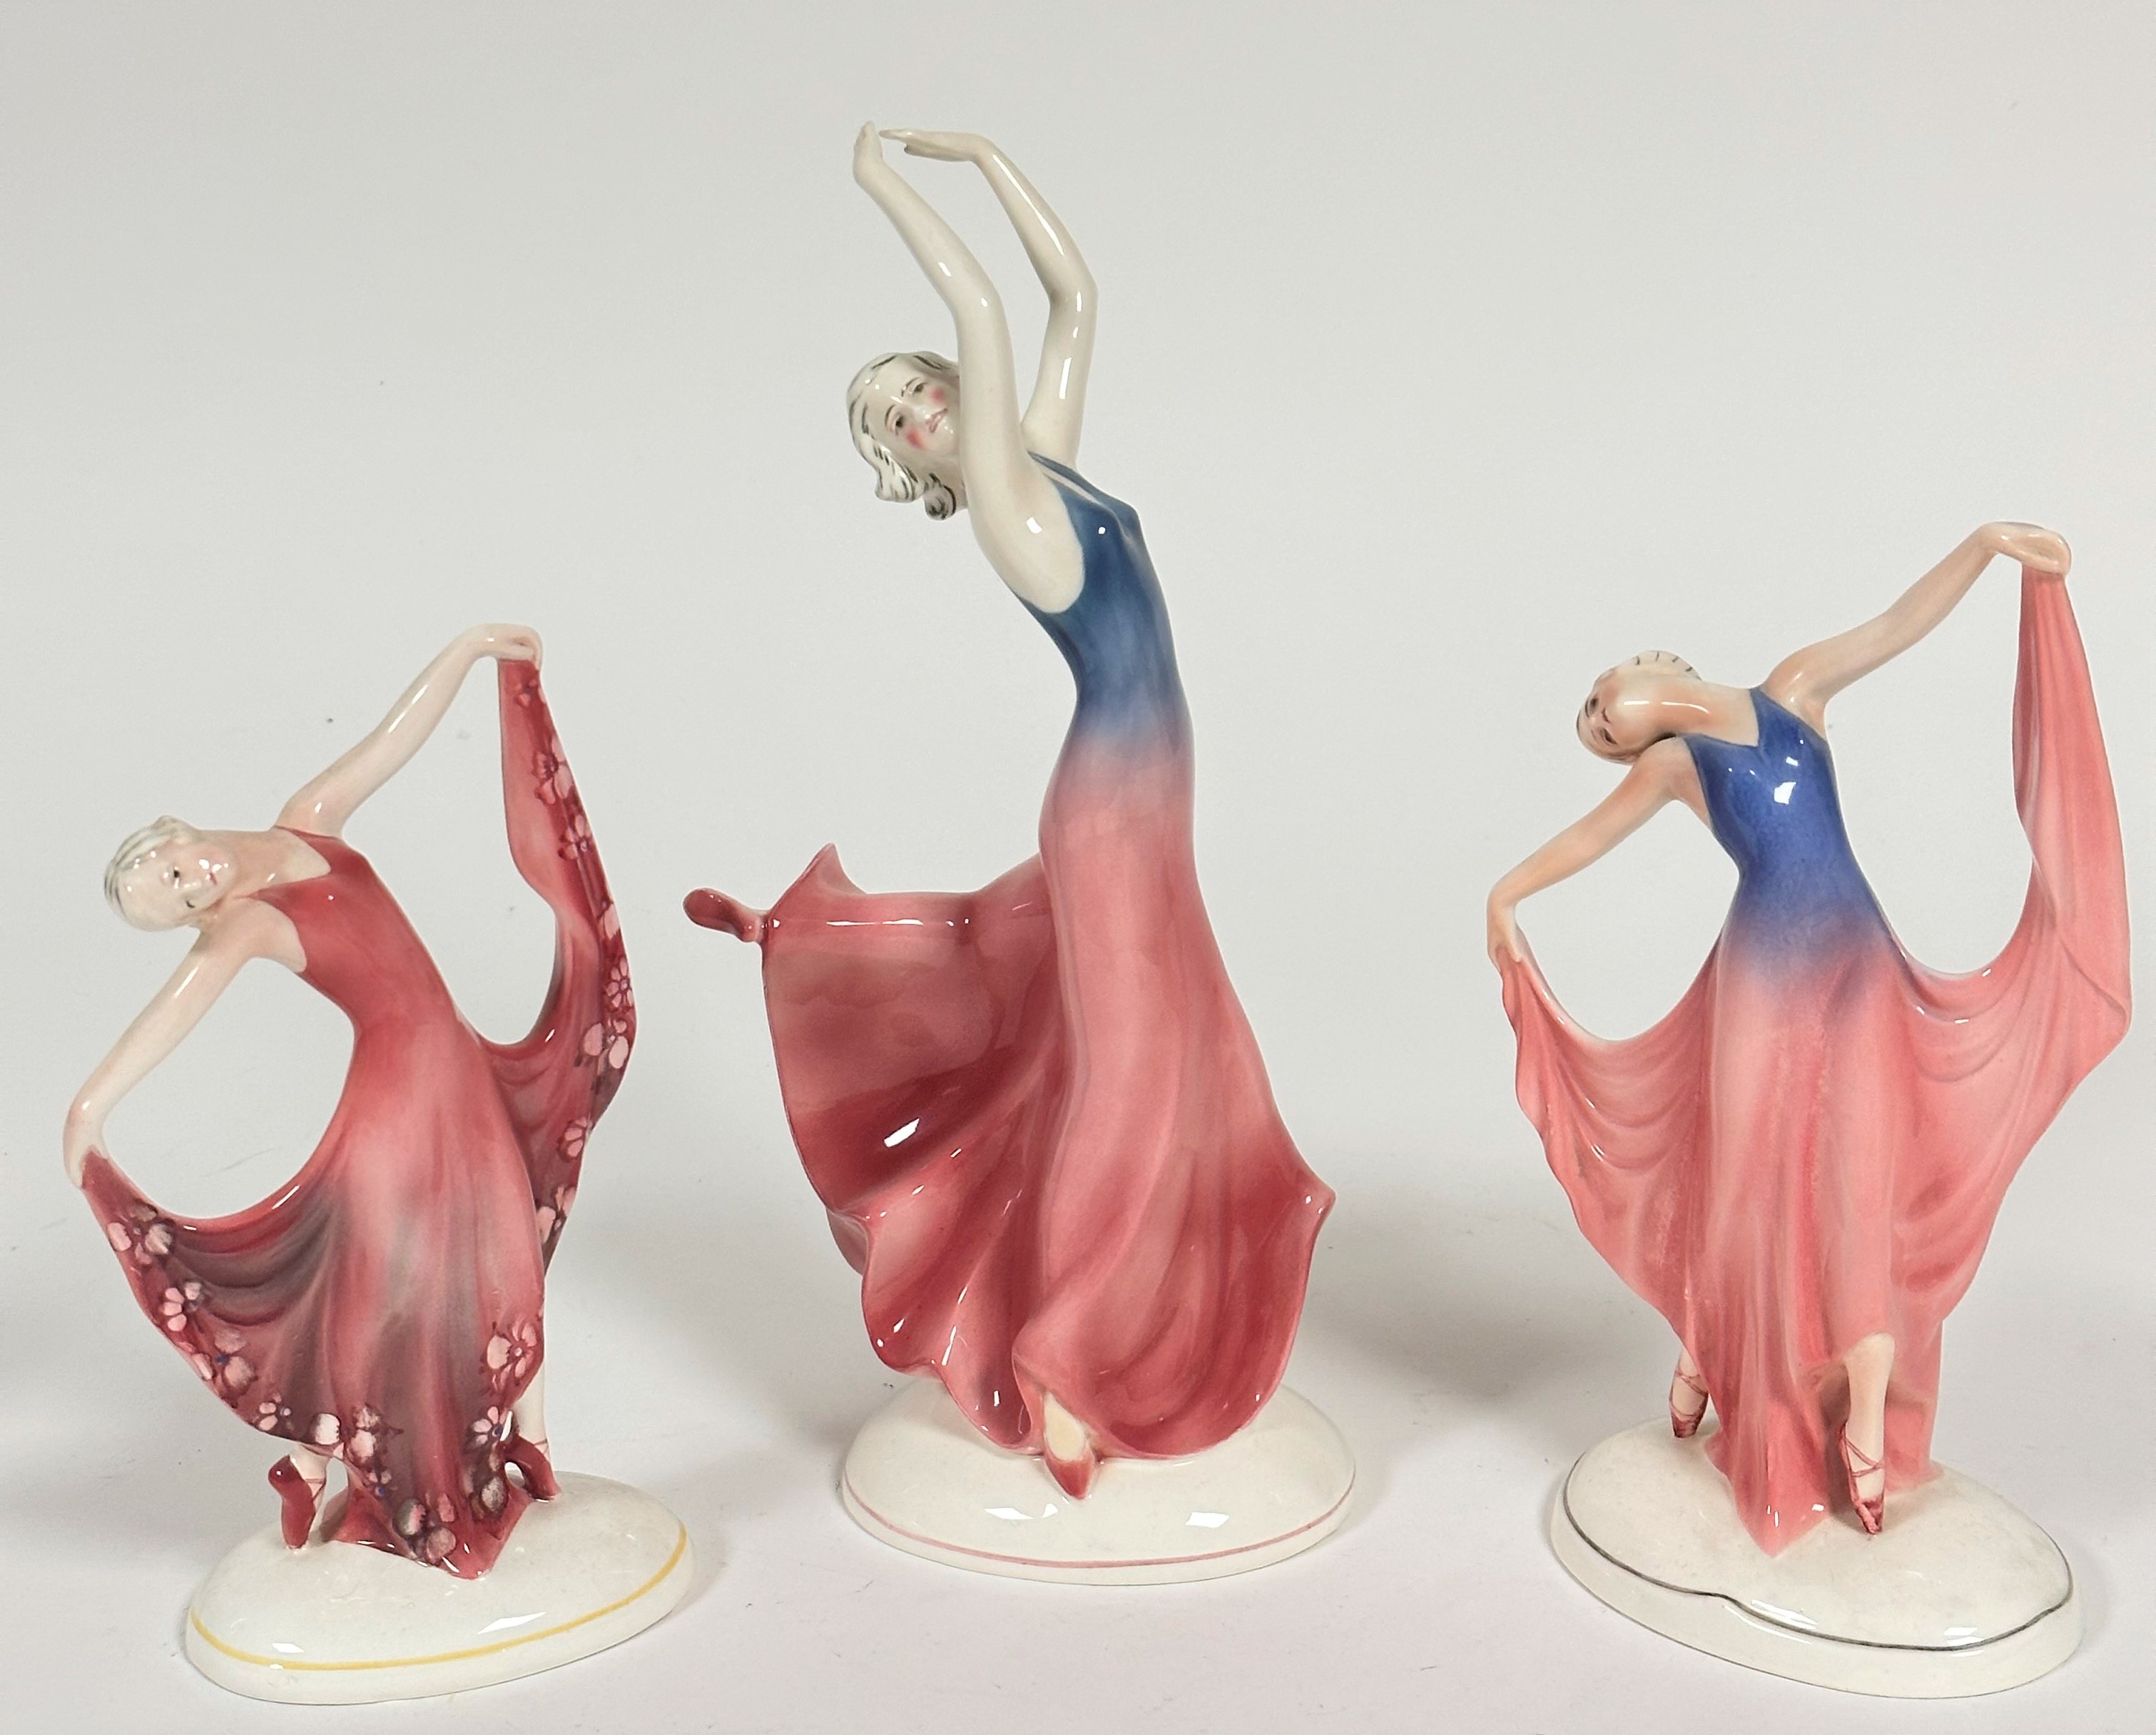 A pair of Katzhutte Art Deco style Standing Figures, both in Evening Dress, Dancing, one with blue